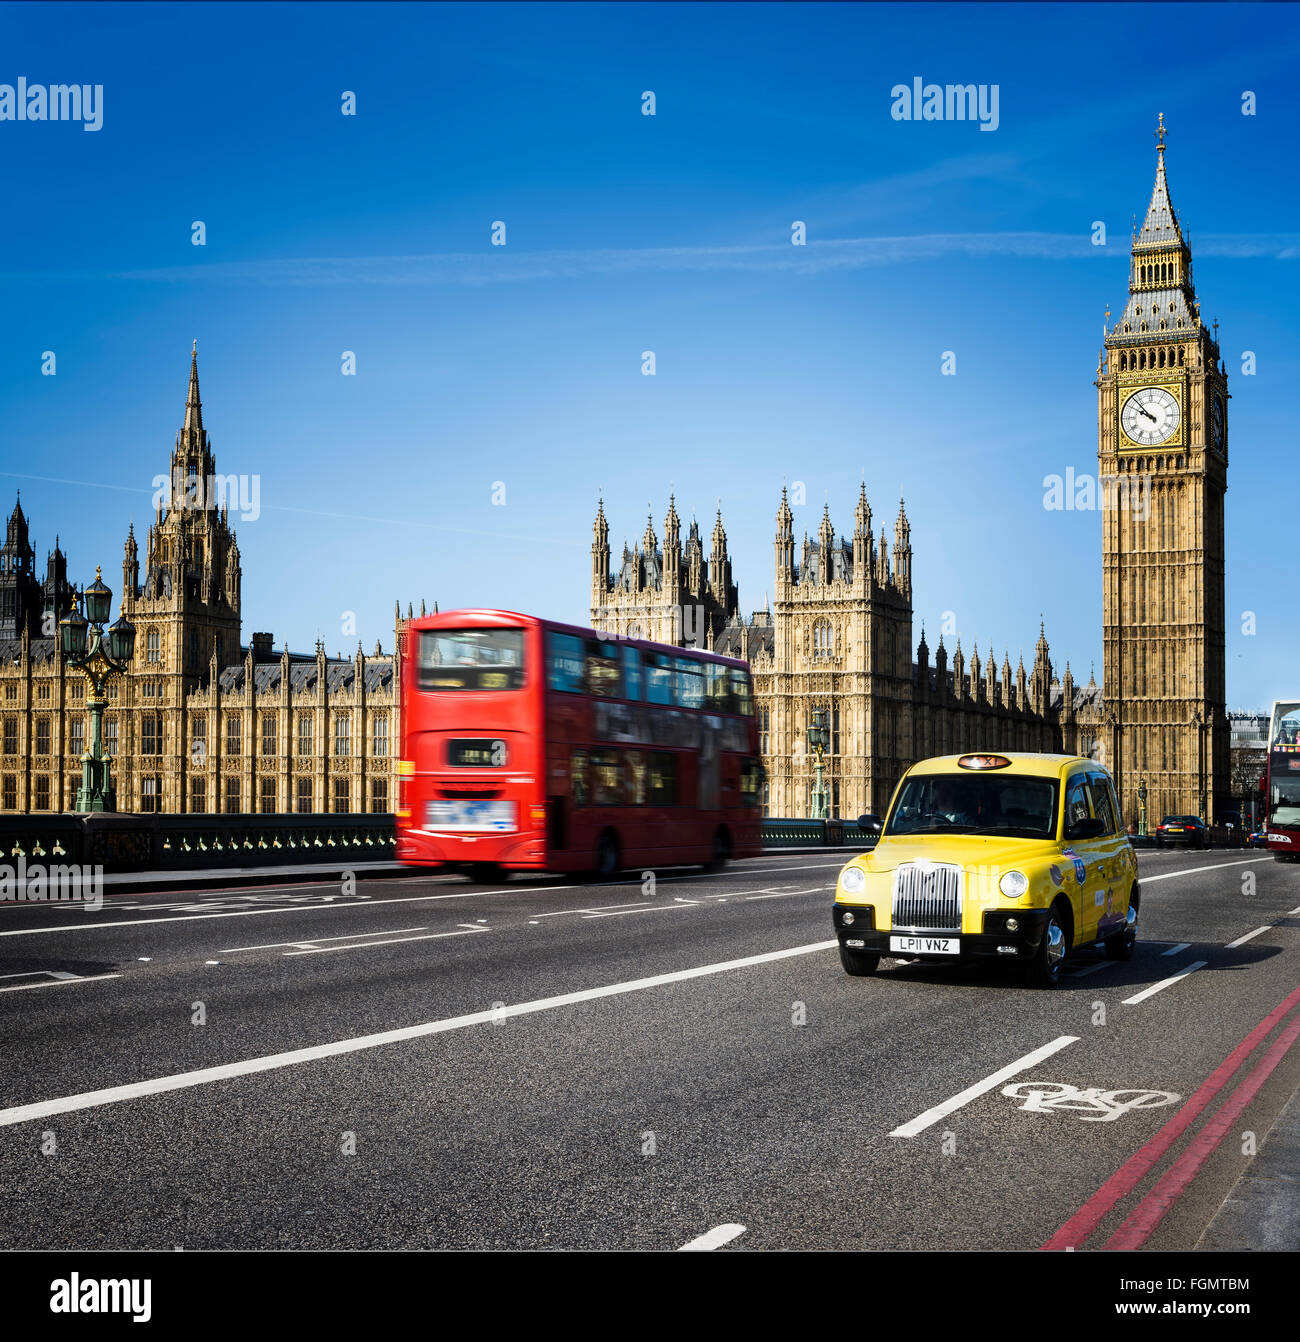 LONDON - 12. April 2015: London-Bus und traditionelle Taxi mit Big Ben am 12. April 2015 in London, England. Stockfoto